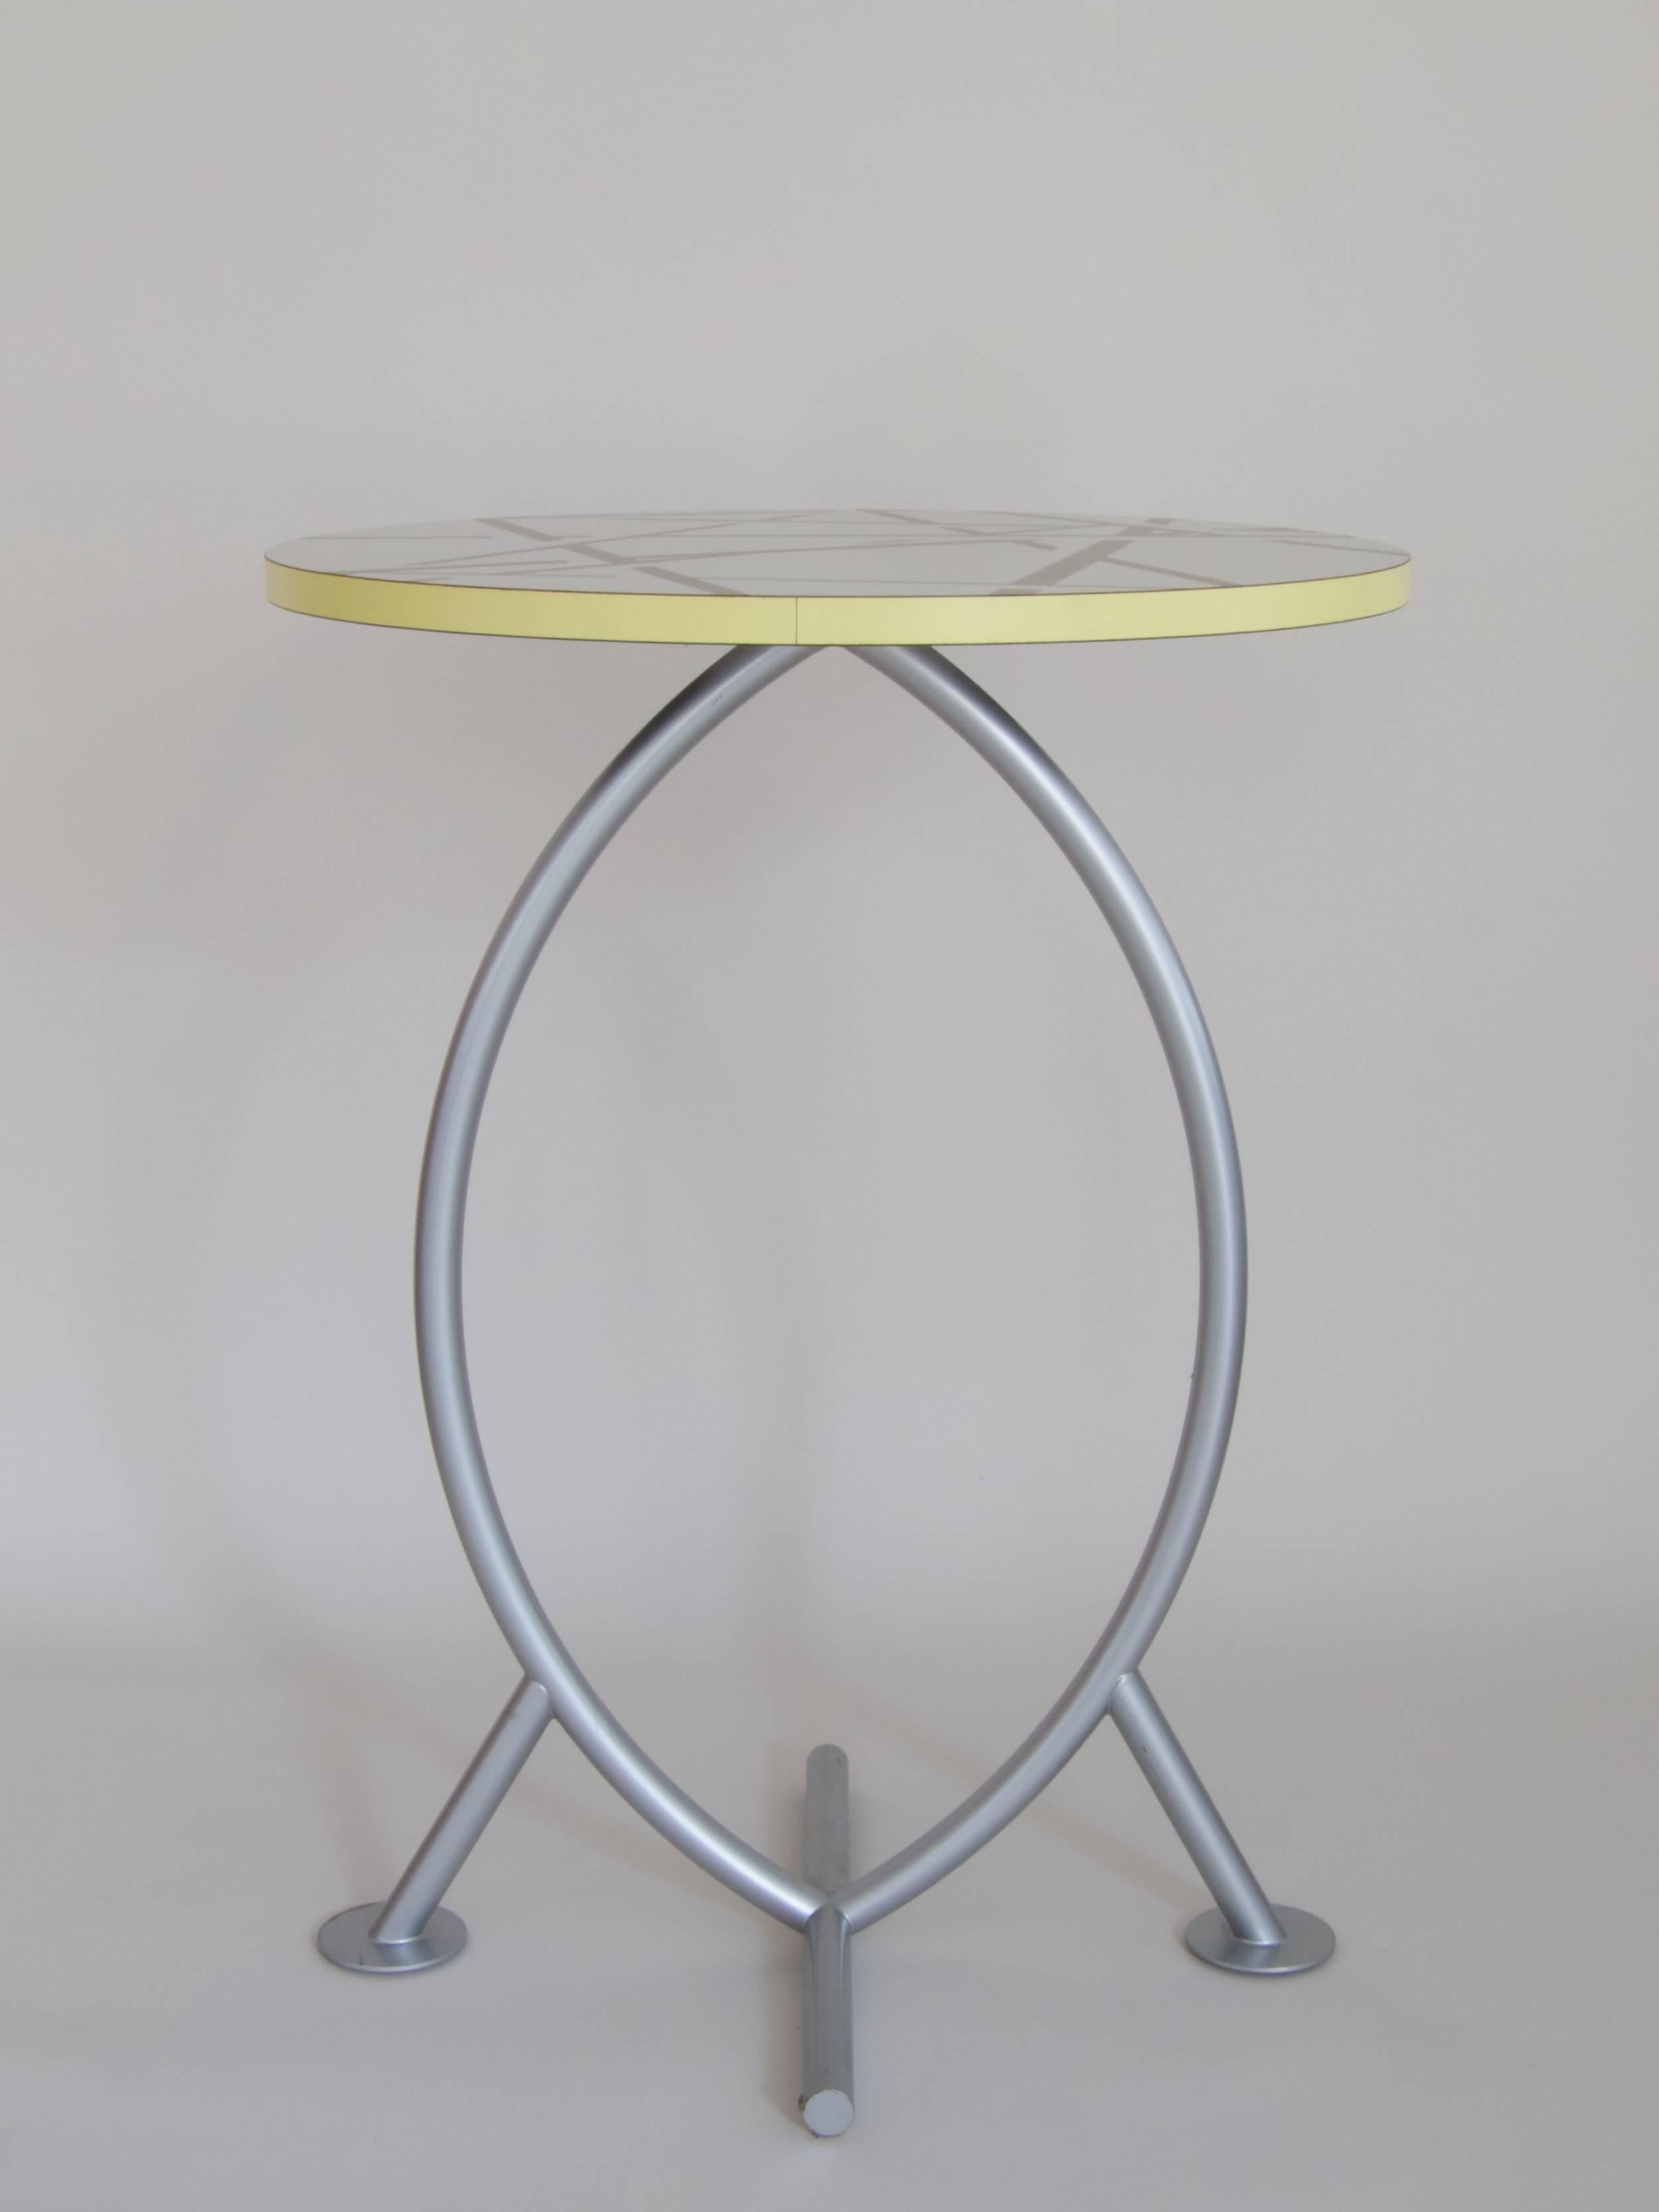 Occasional table ”Cairo” 1986
by Michele De Lucchi
for Memphis Milano
top: laminated wood, base: steel powder coated.
Ø 54,5, h 74,5 / Ø 21,46 in, h 29,33 in

Good condition with minor traces of gentle usage!